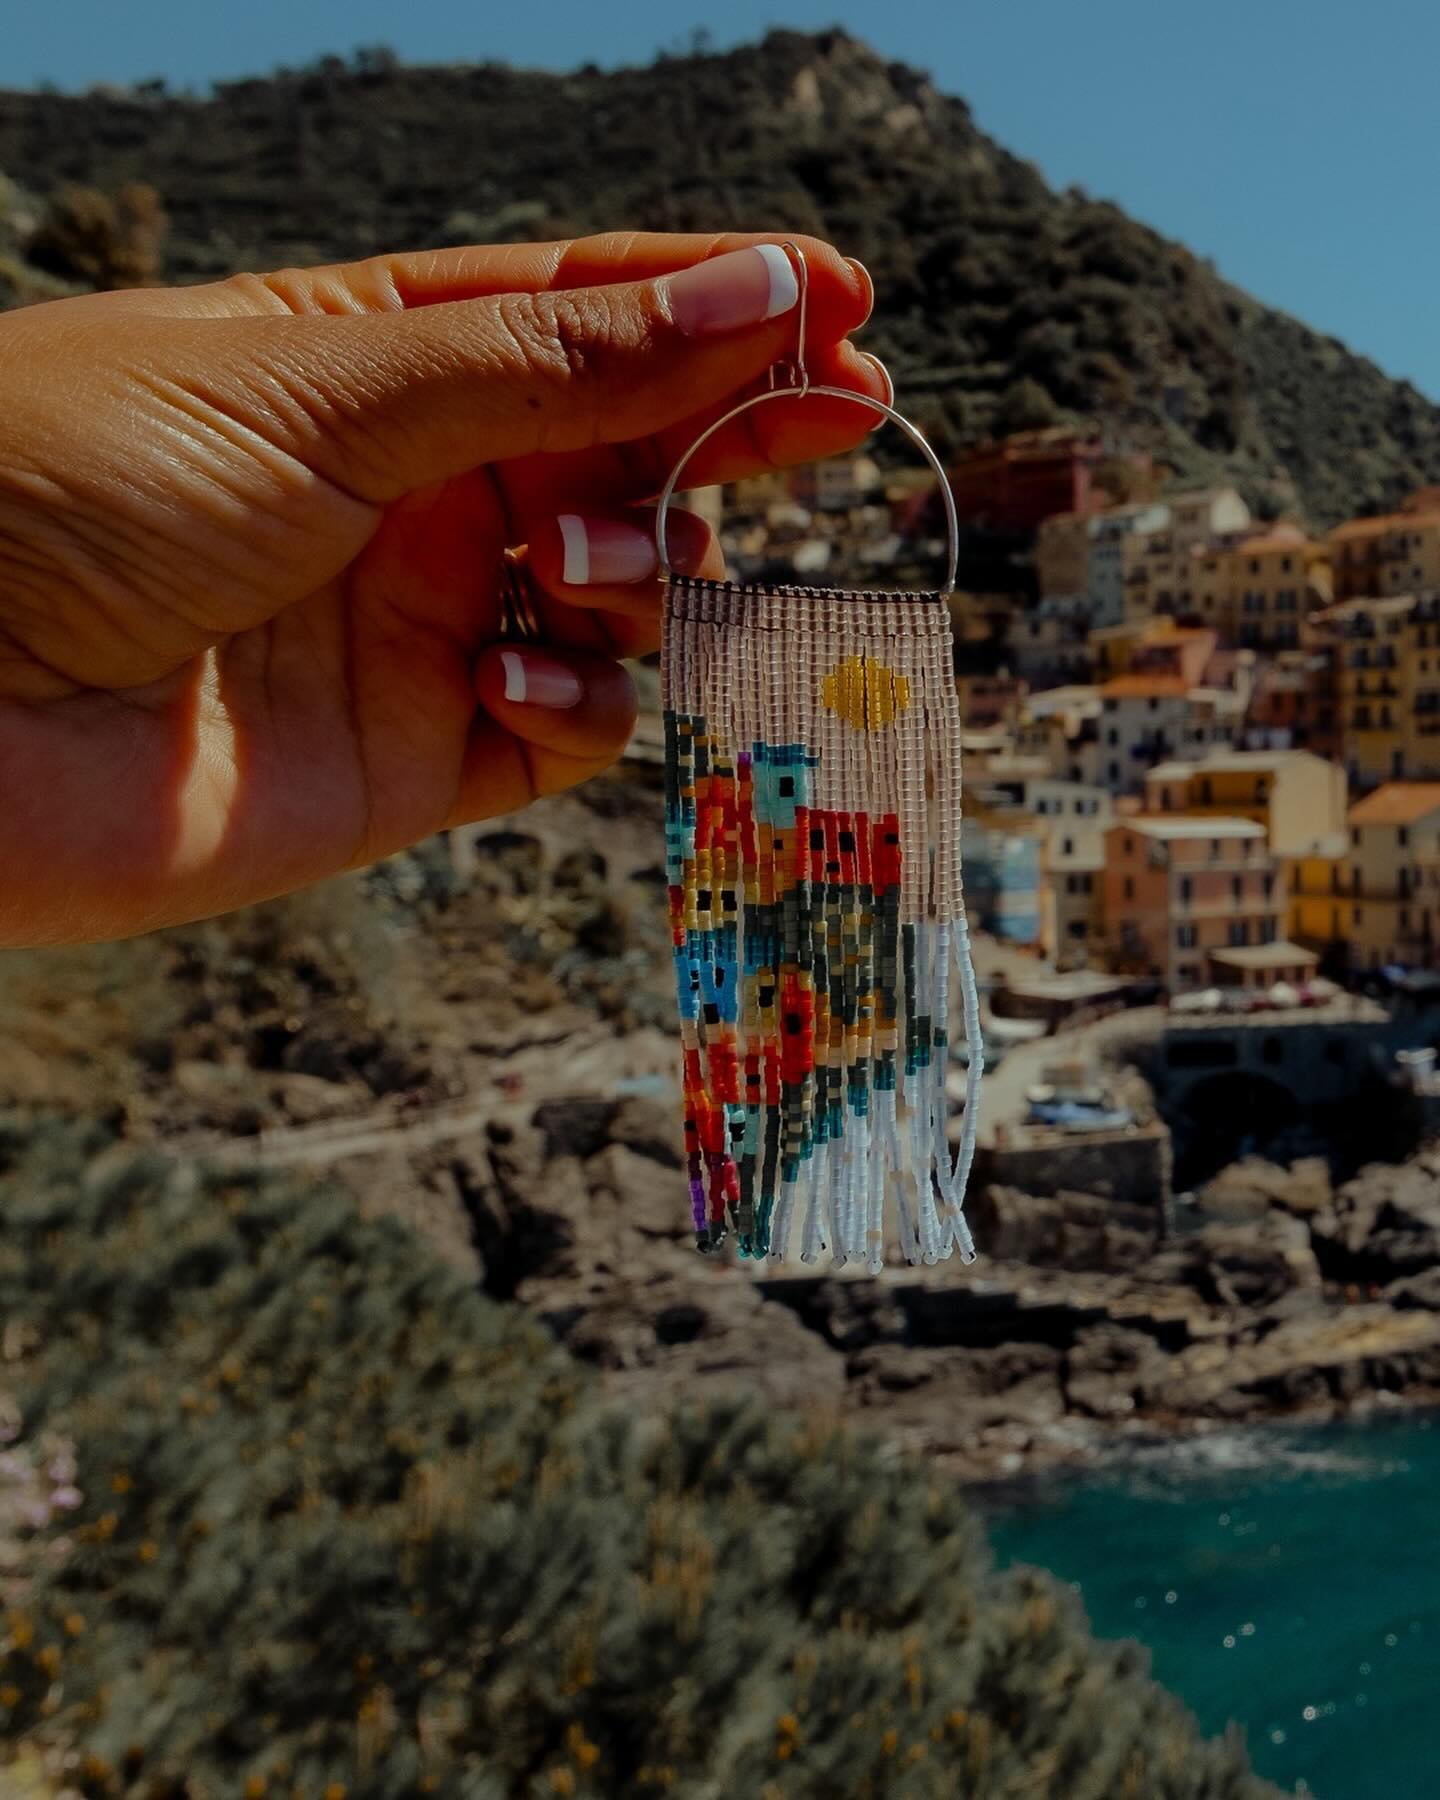 I&rsquo;m so proud of these, they needed a permanent photo home here. 

Revisiting Cinque Terre 20 years later was a TRIP! So glad I could spend time in this magical place and looking forward to bringing you all a little bit of beaded goodness inspir